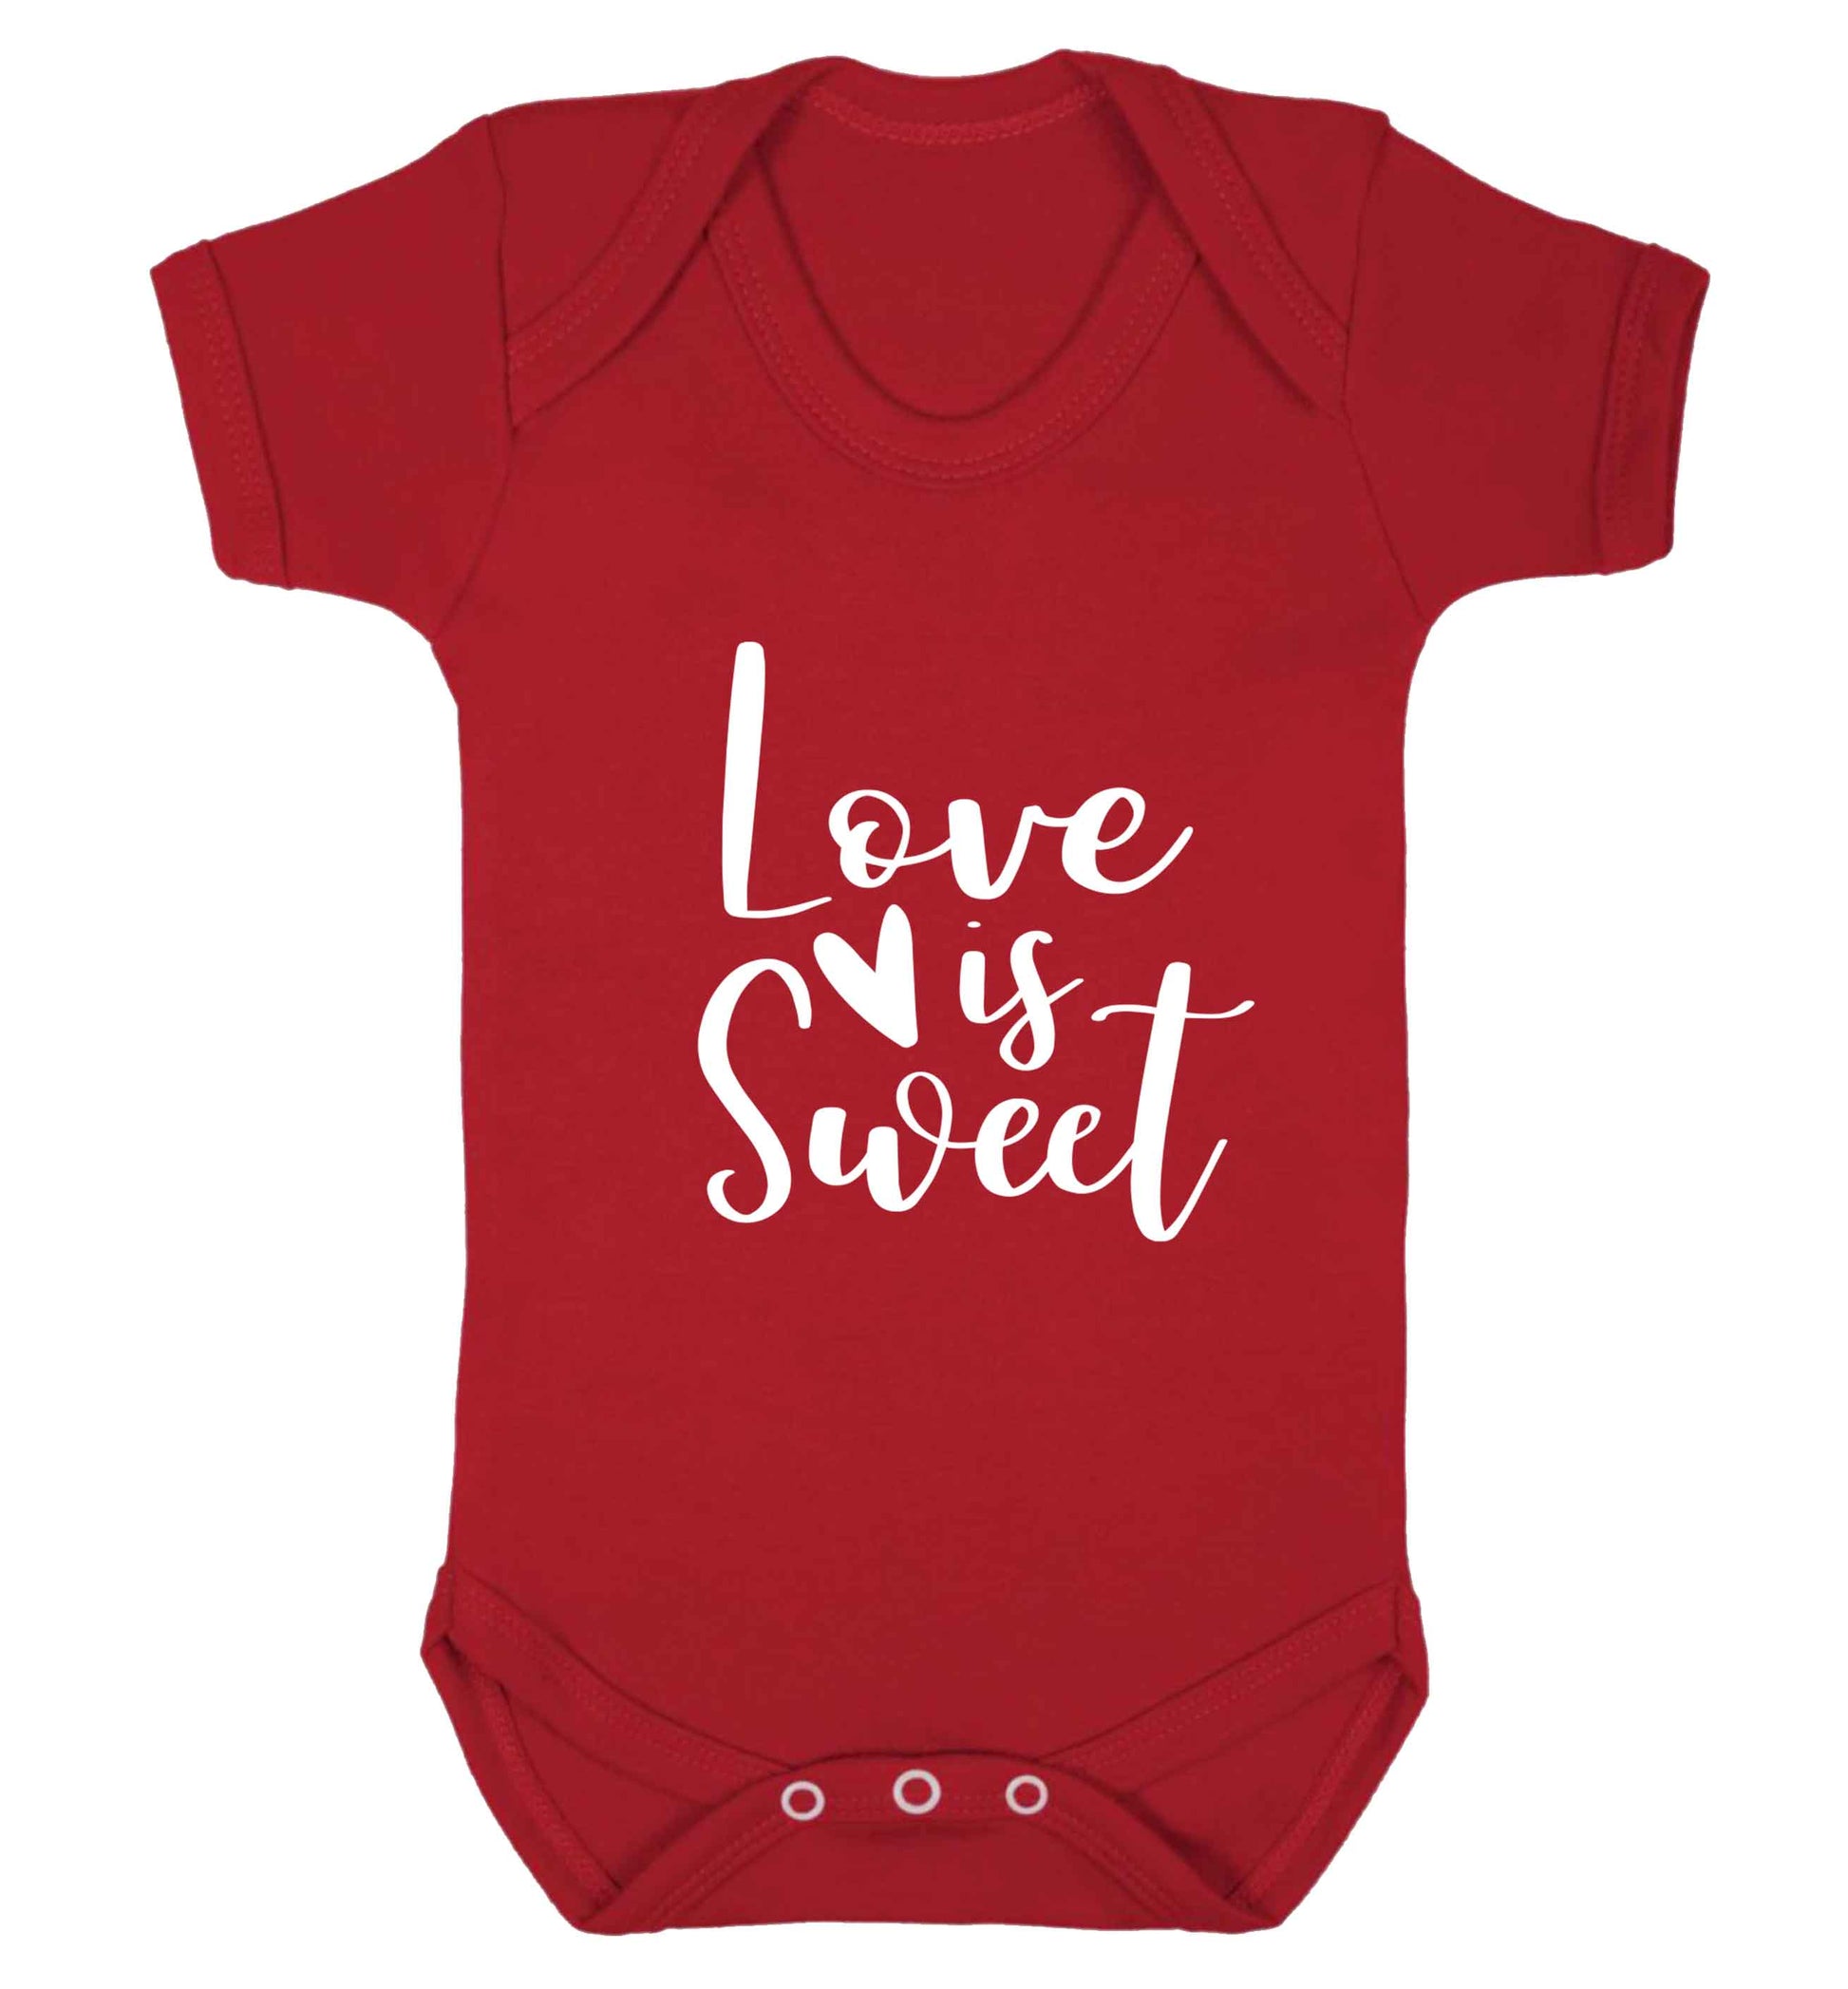 Love really does make the world go round! Ideal for weddings, valentines or just simply to show someone you love them!  baby vest red 18-24 months